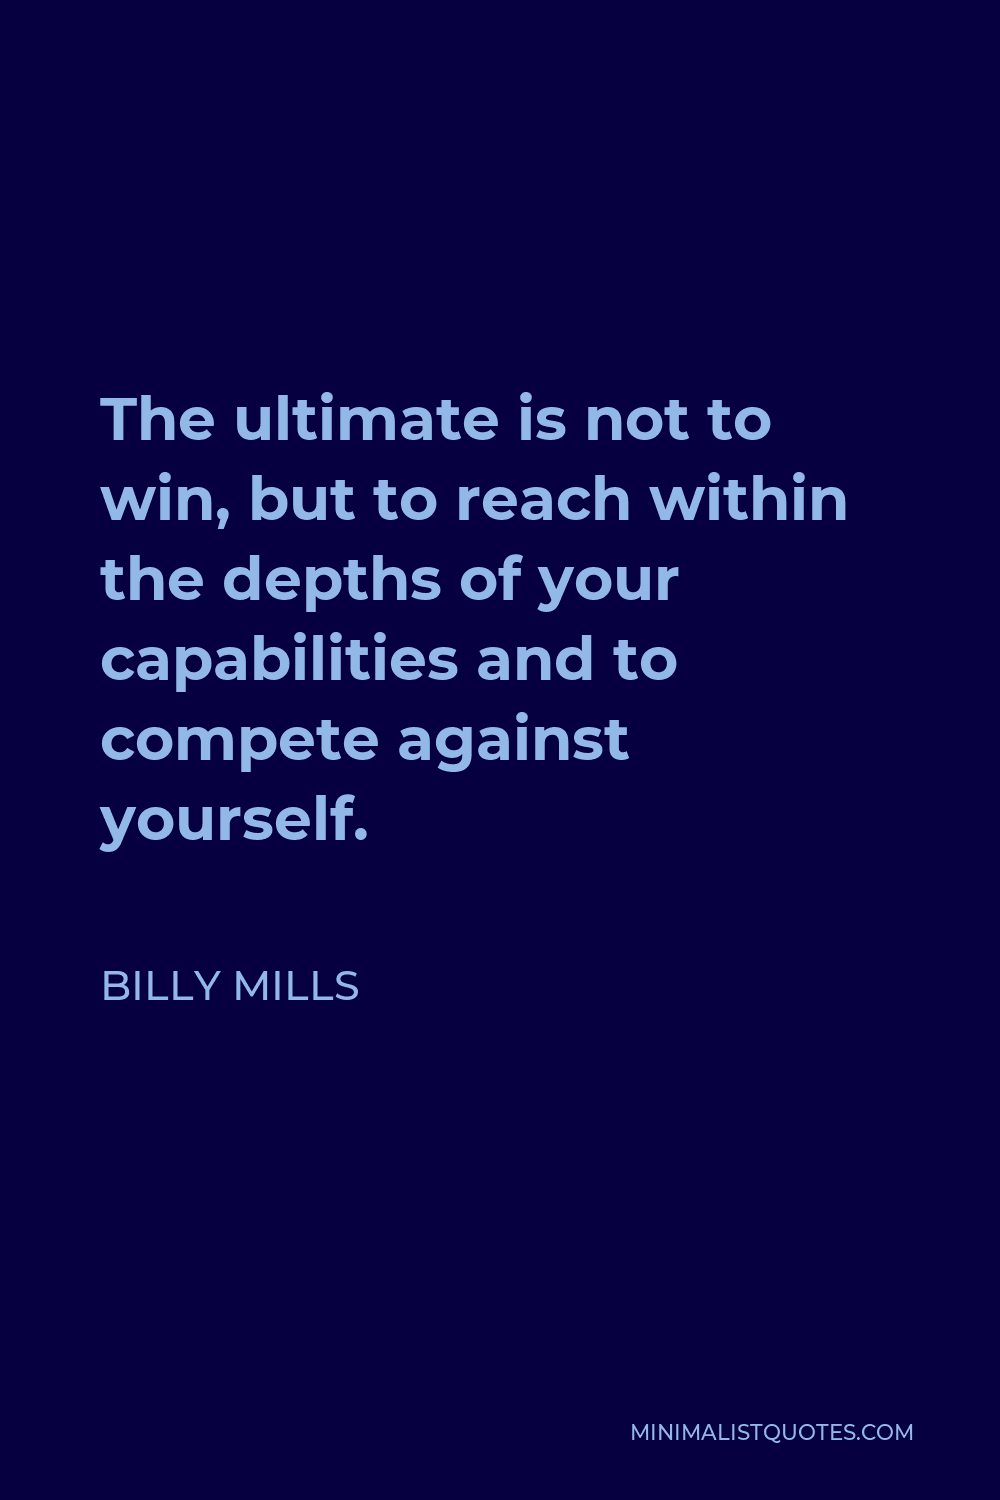 Billy Mills Quote - The ultimate is not to win, but to reach within the depths of your capabilities and to compete against yourself.